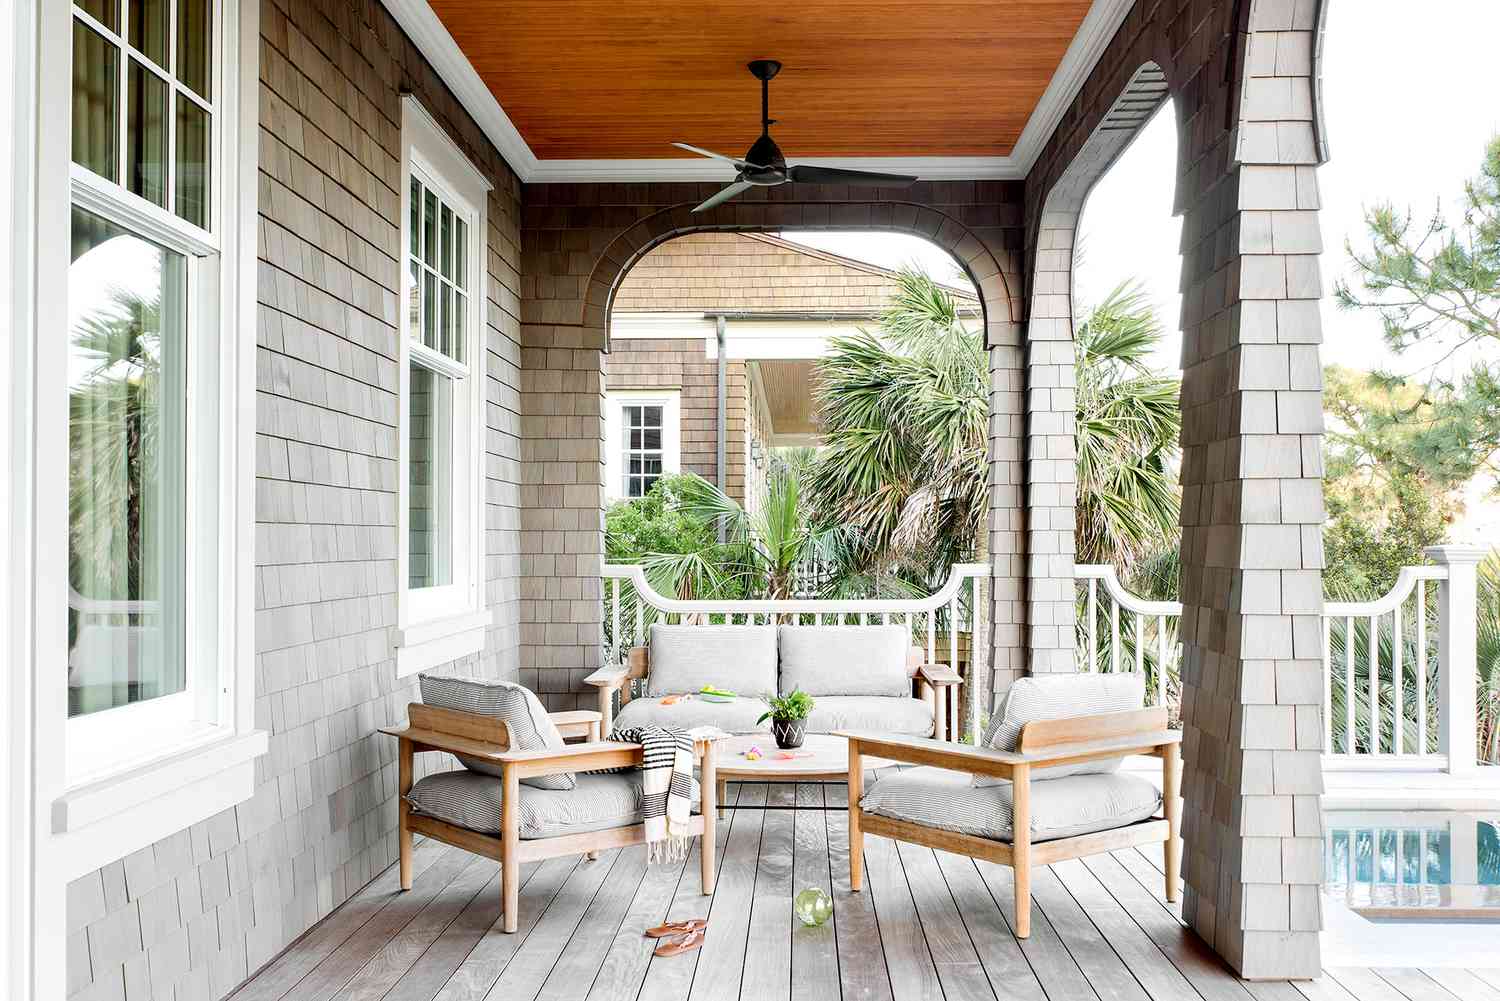 Wooden porch with seating and table